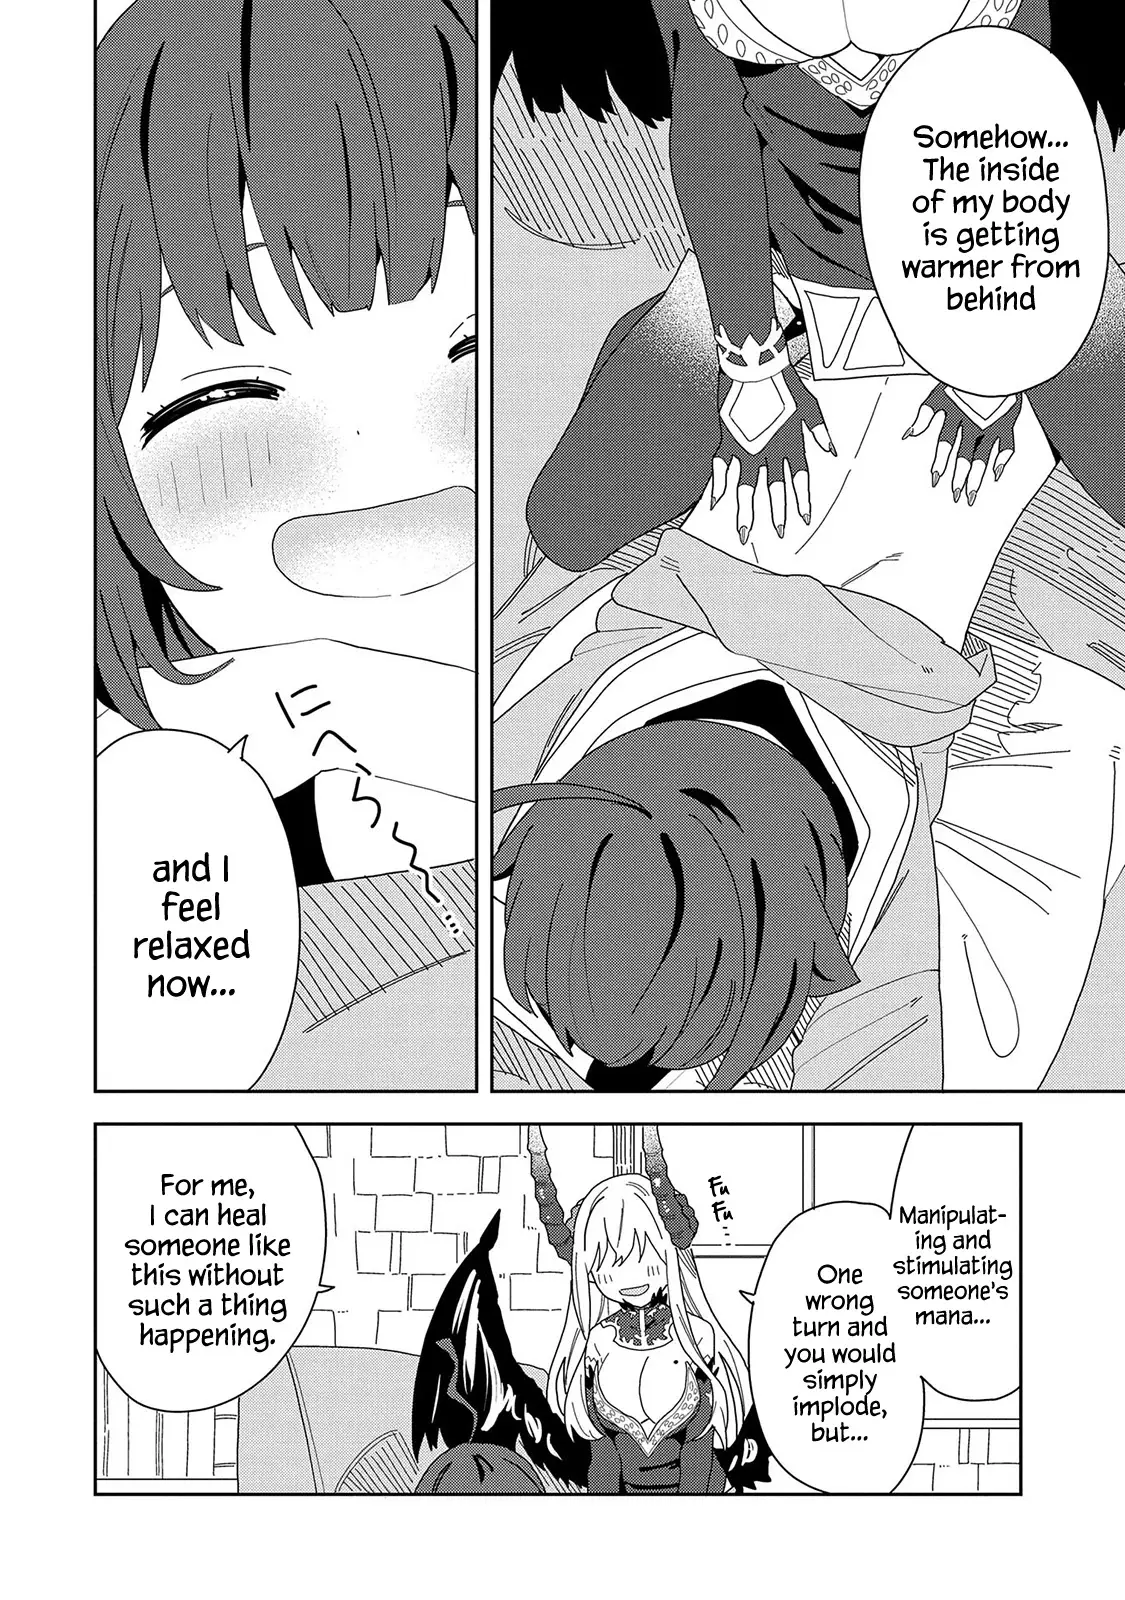 I Summoned The Devil To Grant Me A Wish, But I Married Her Instead Since She Was Adorable ~My New Devil Wife~ - 6 page 4